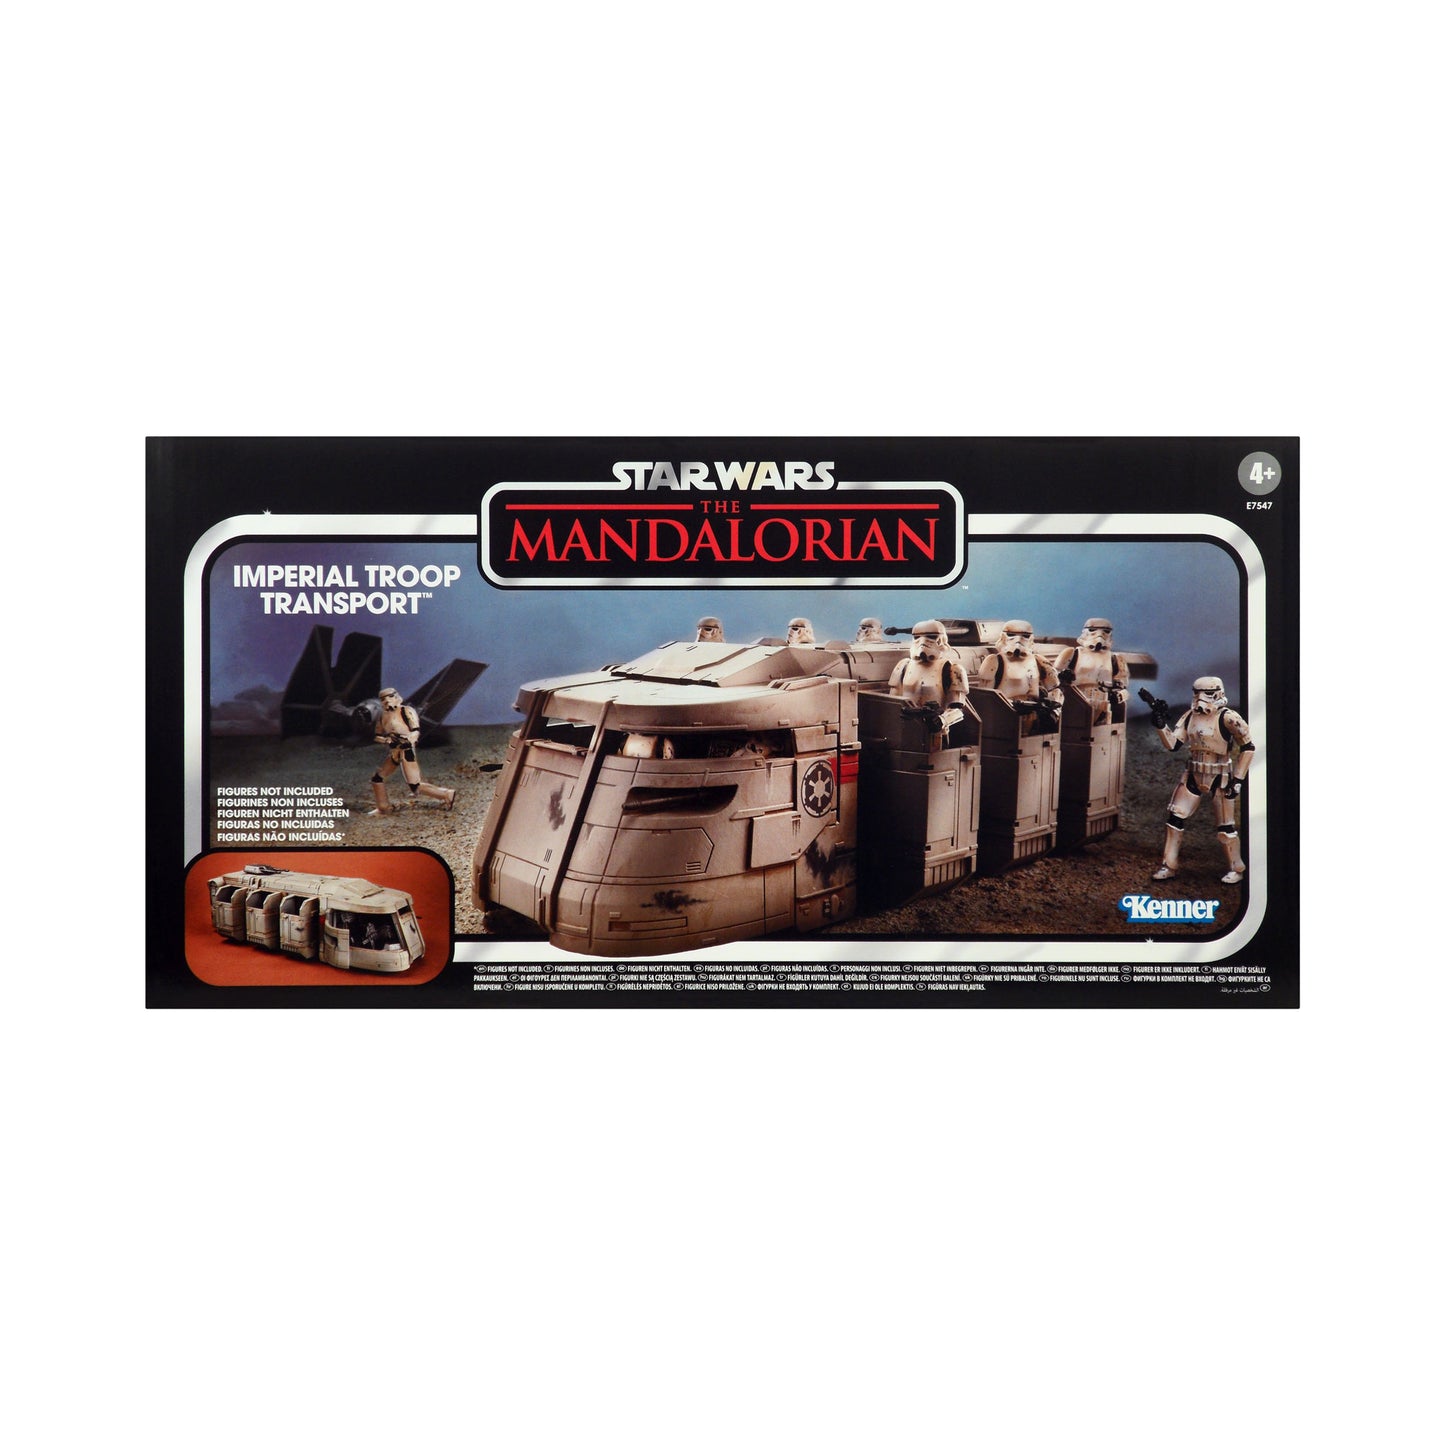 Star Wars: The Vintage Collection Imperial Troop Transport from the Mandalorian